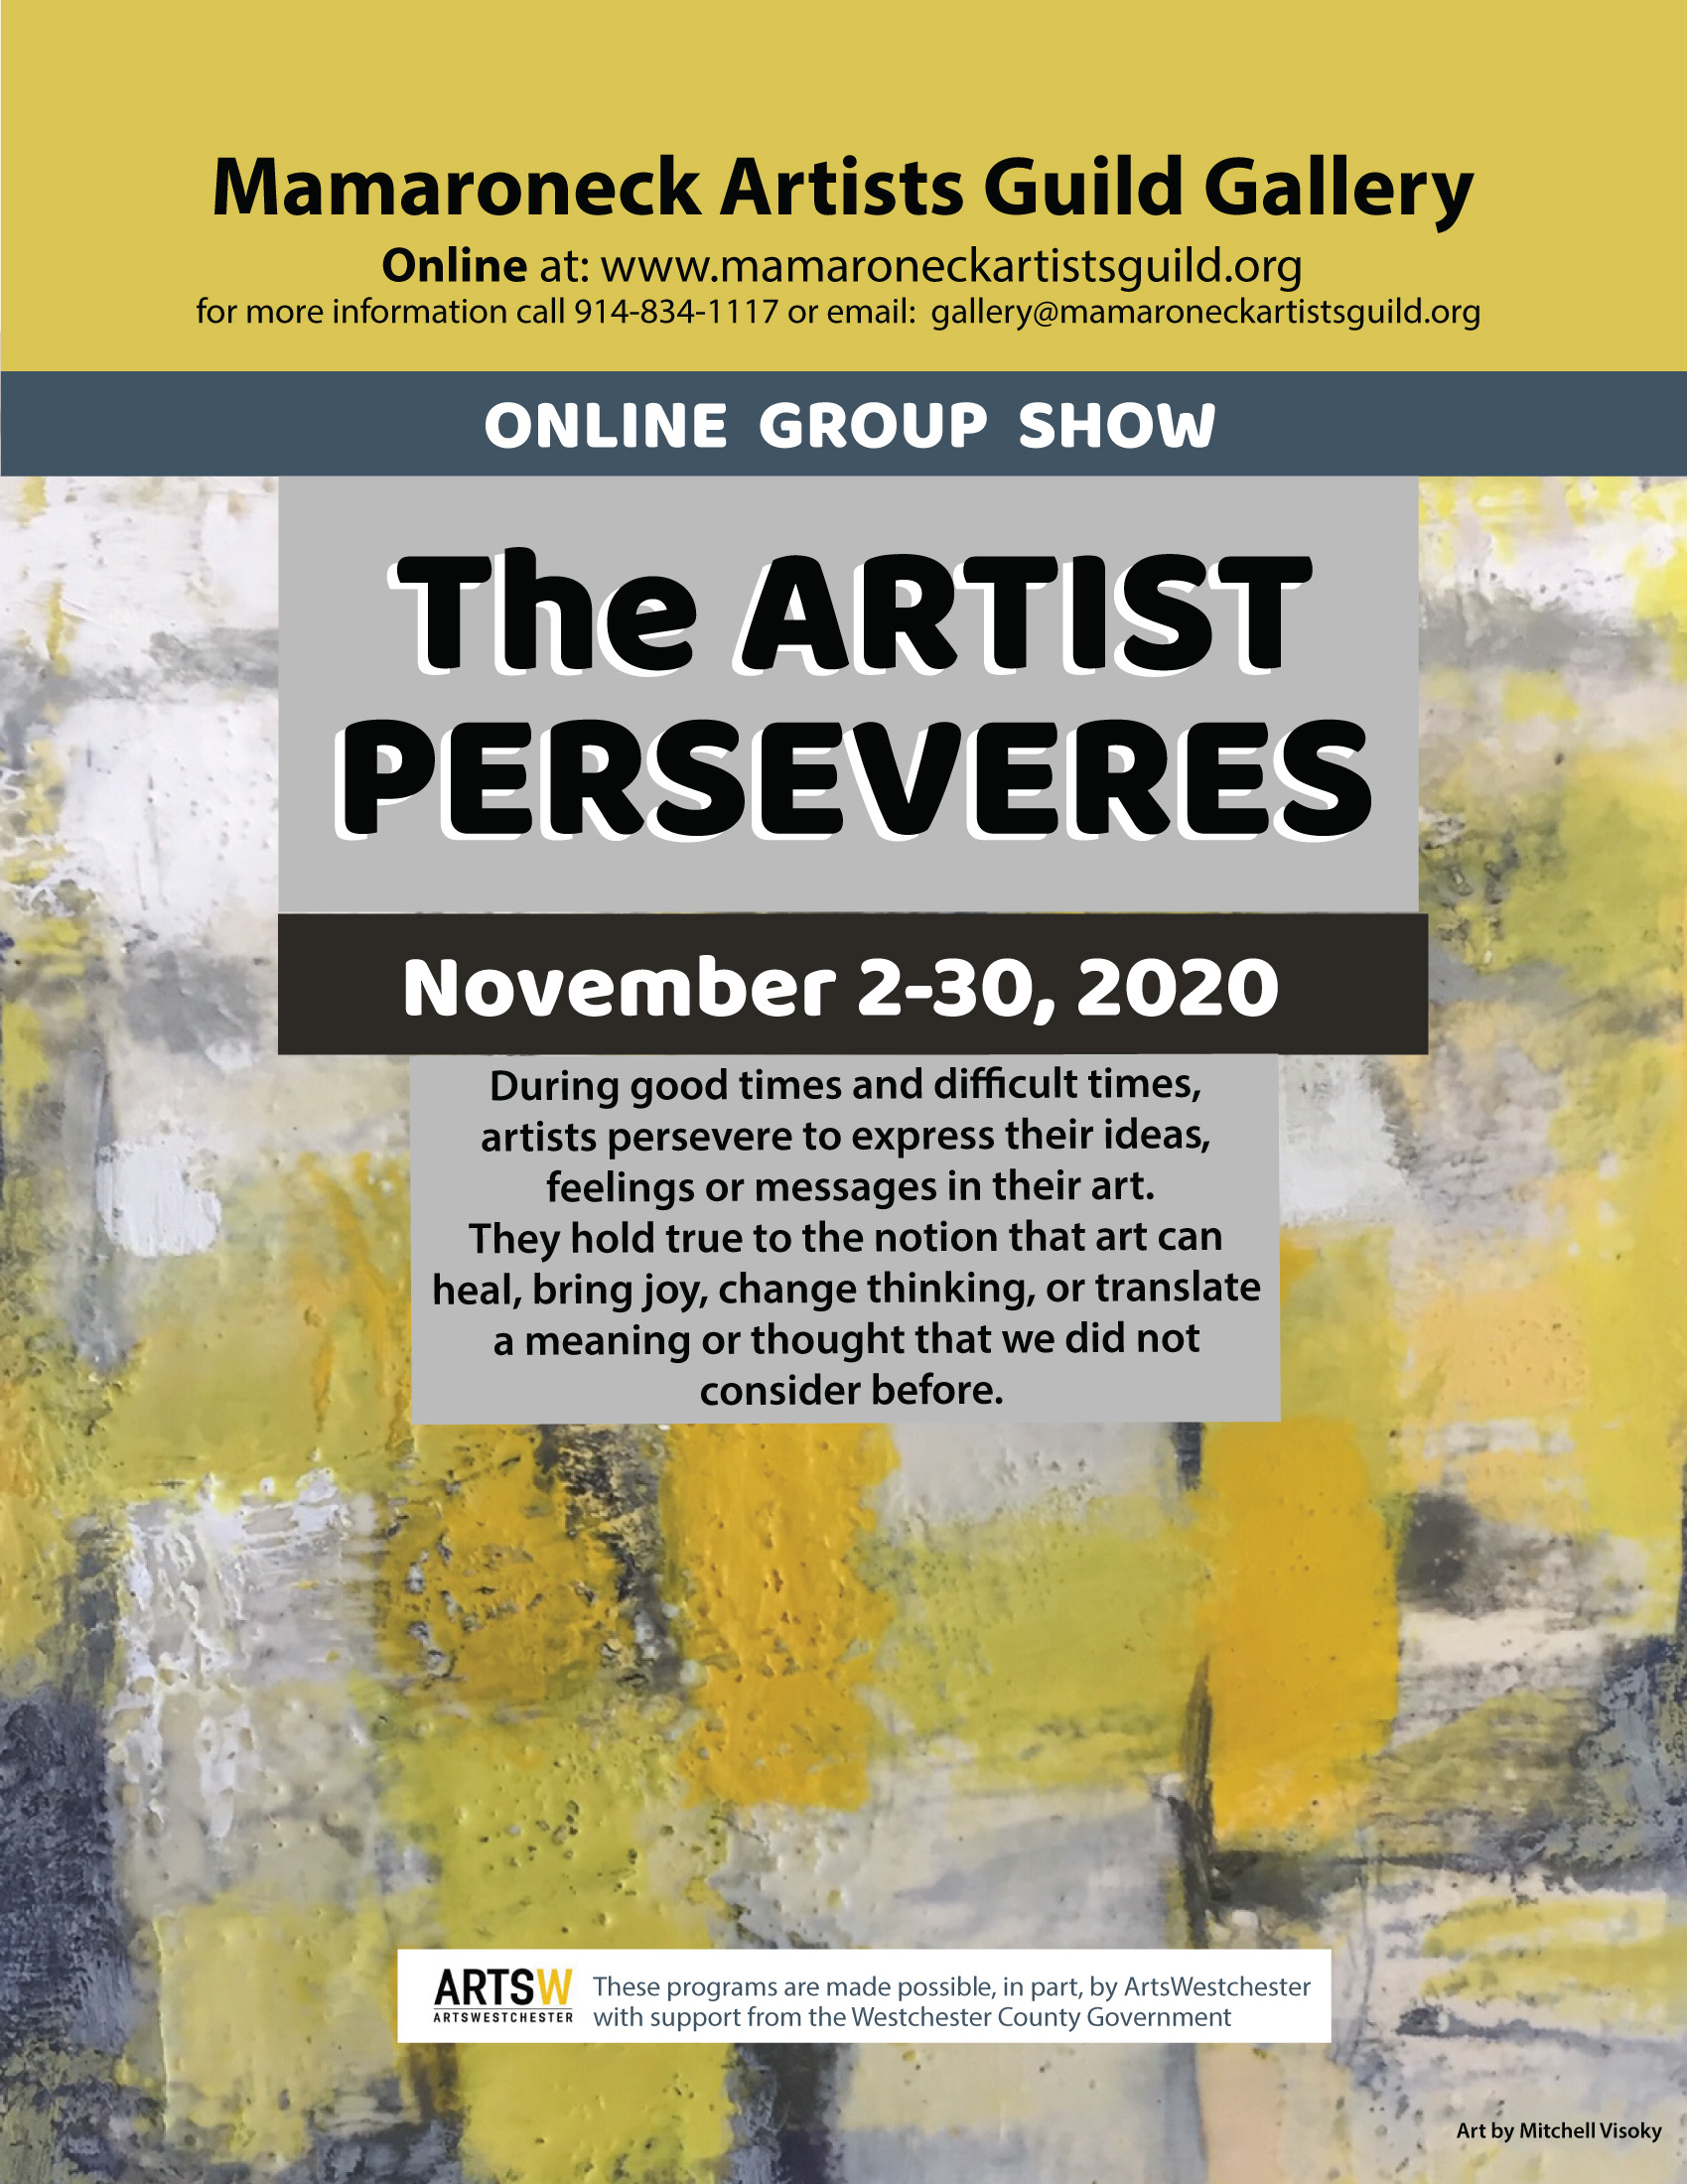 A flyer for online group show The Artist Perseveres